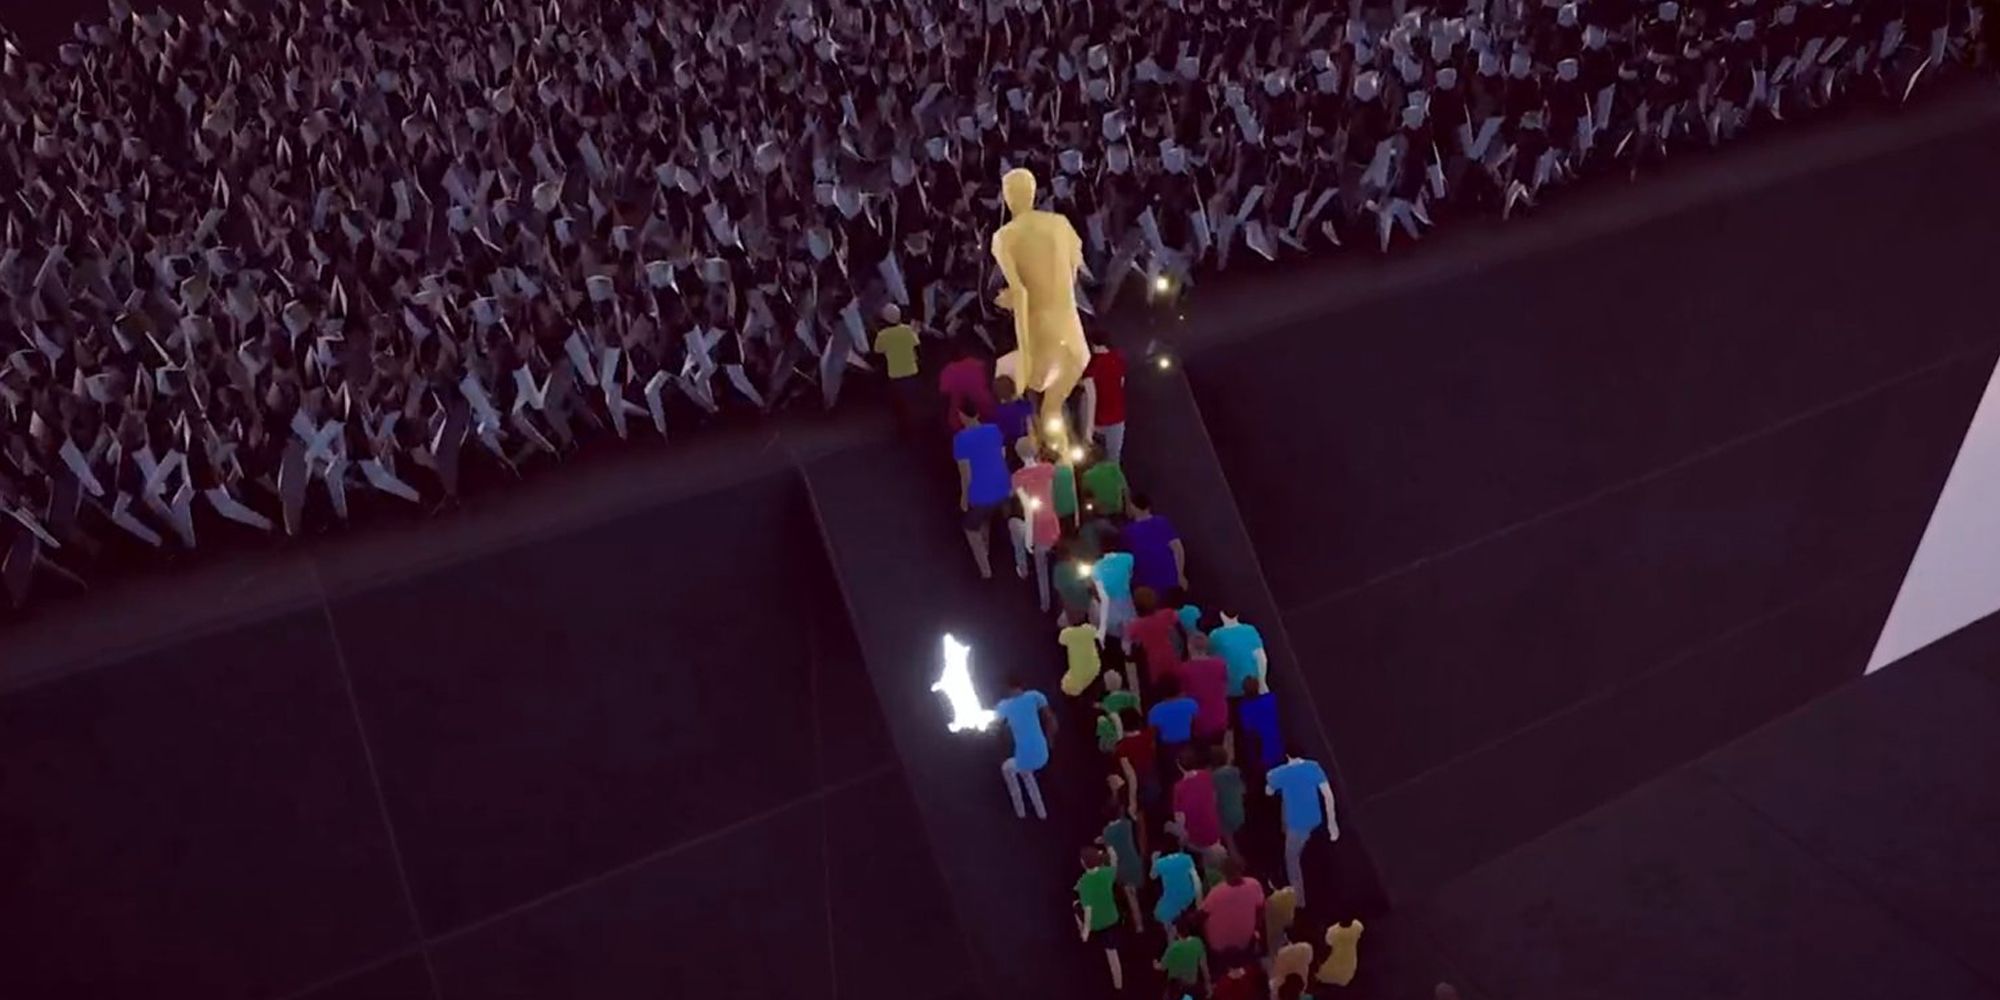 People walking up a ramp guided by a glowing white dog